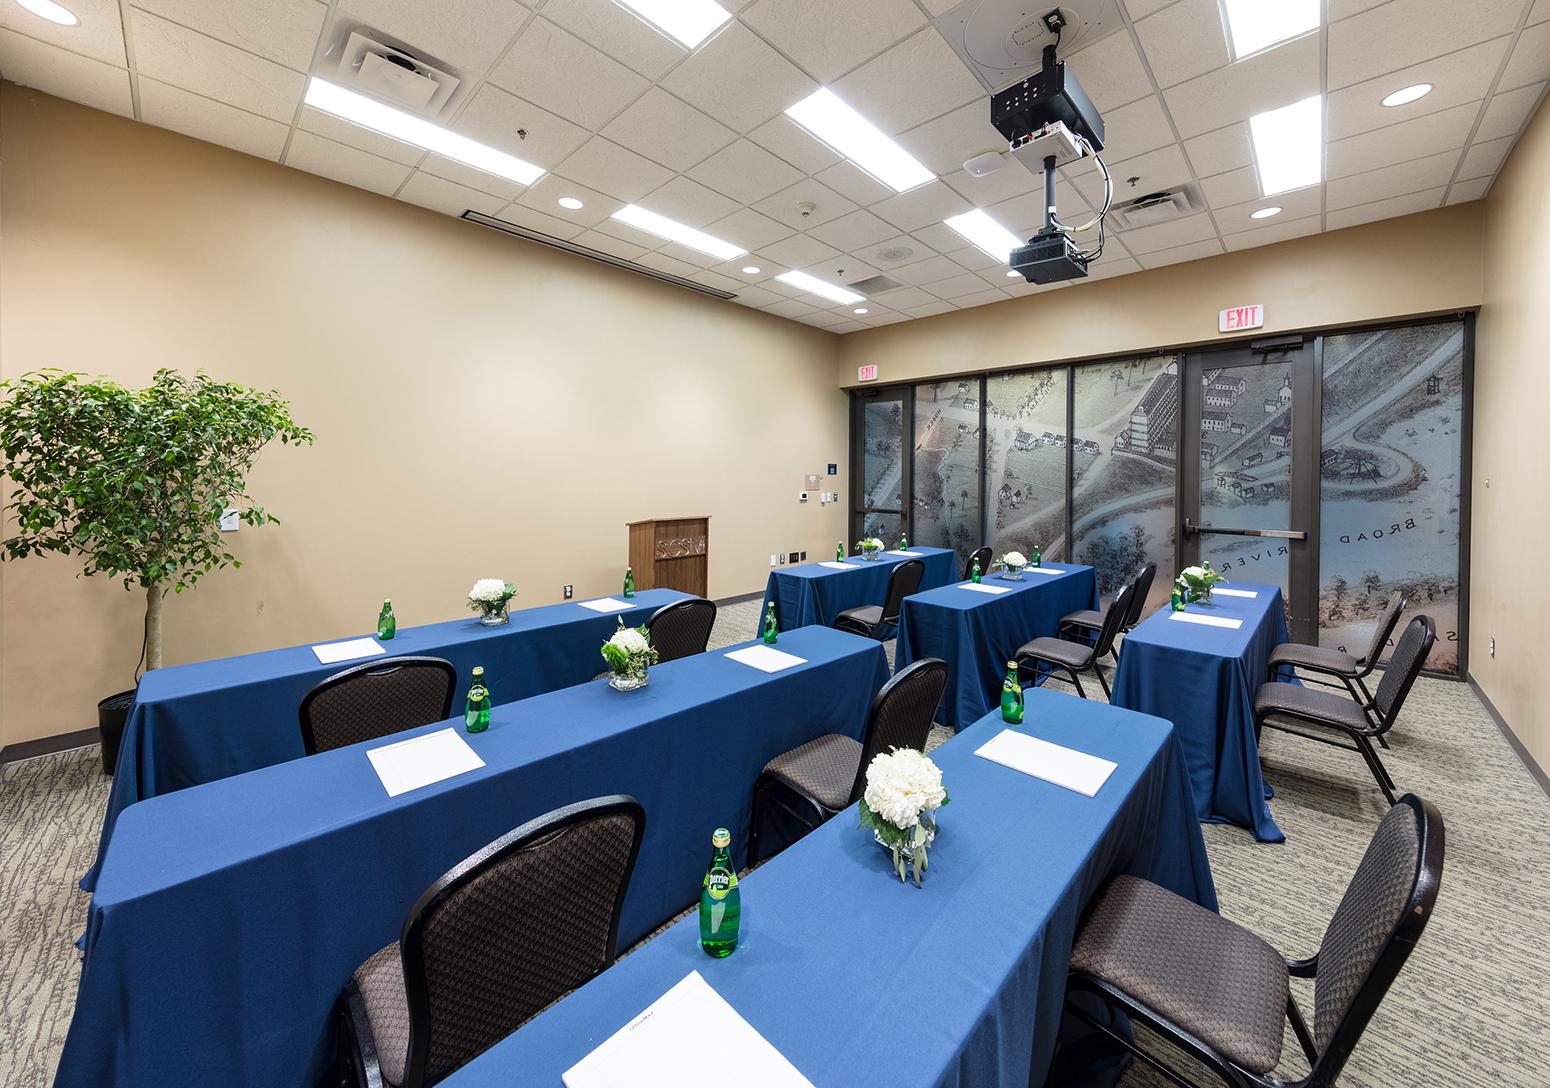 Room with tables with blue table cloths set up facing a speaker's podium